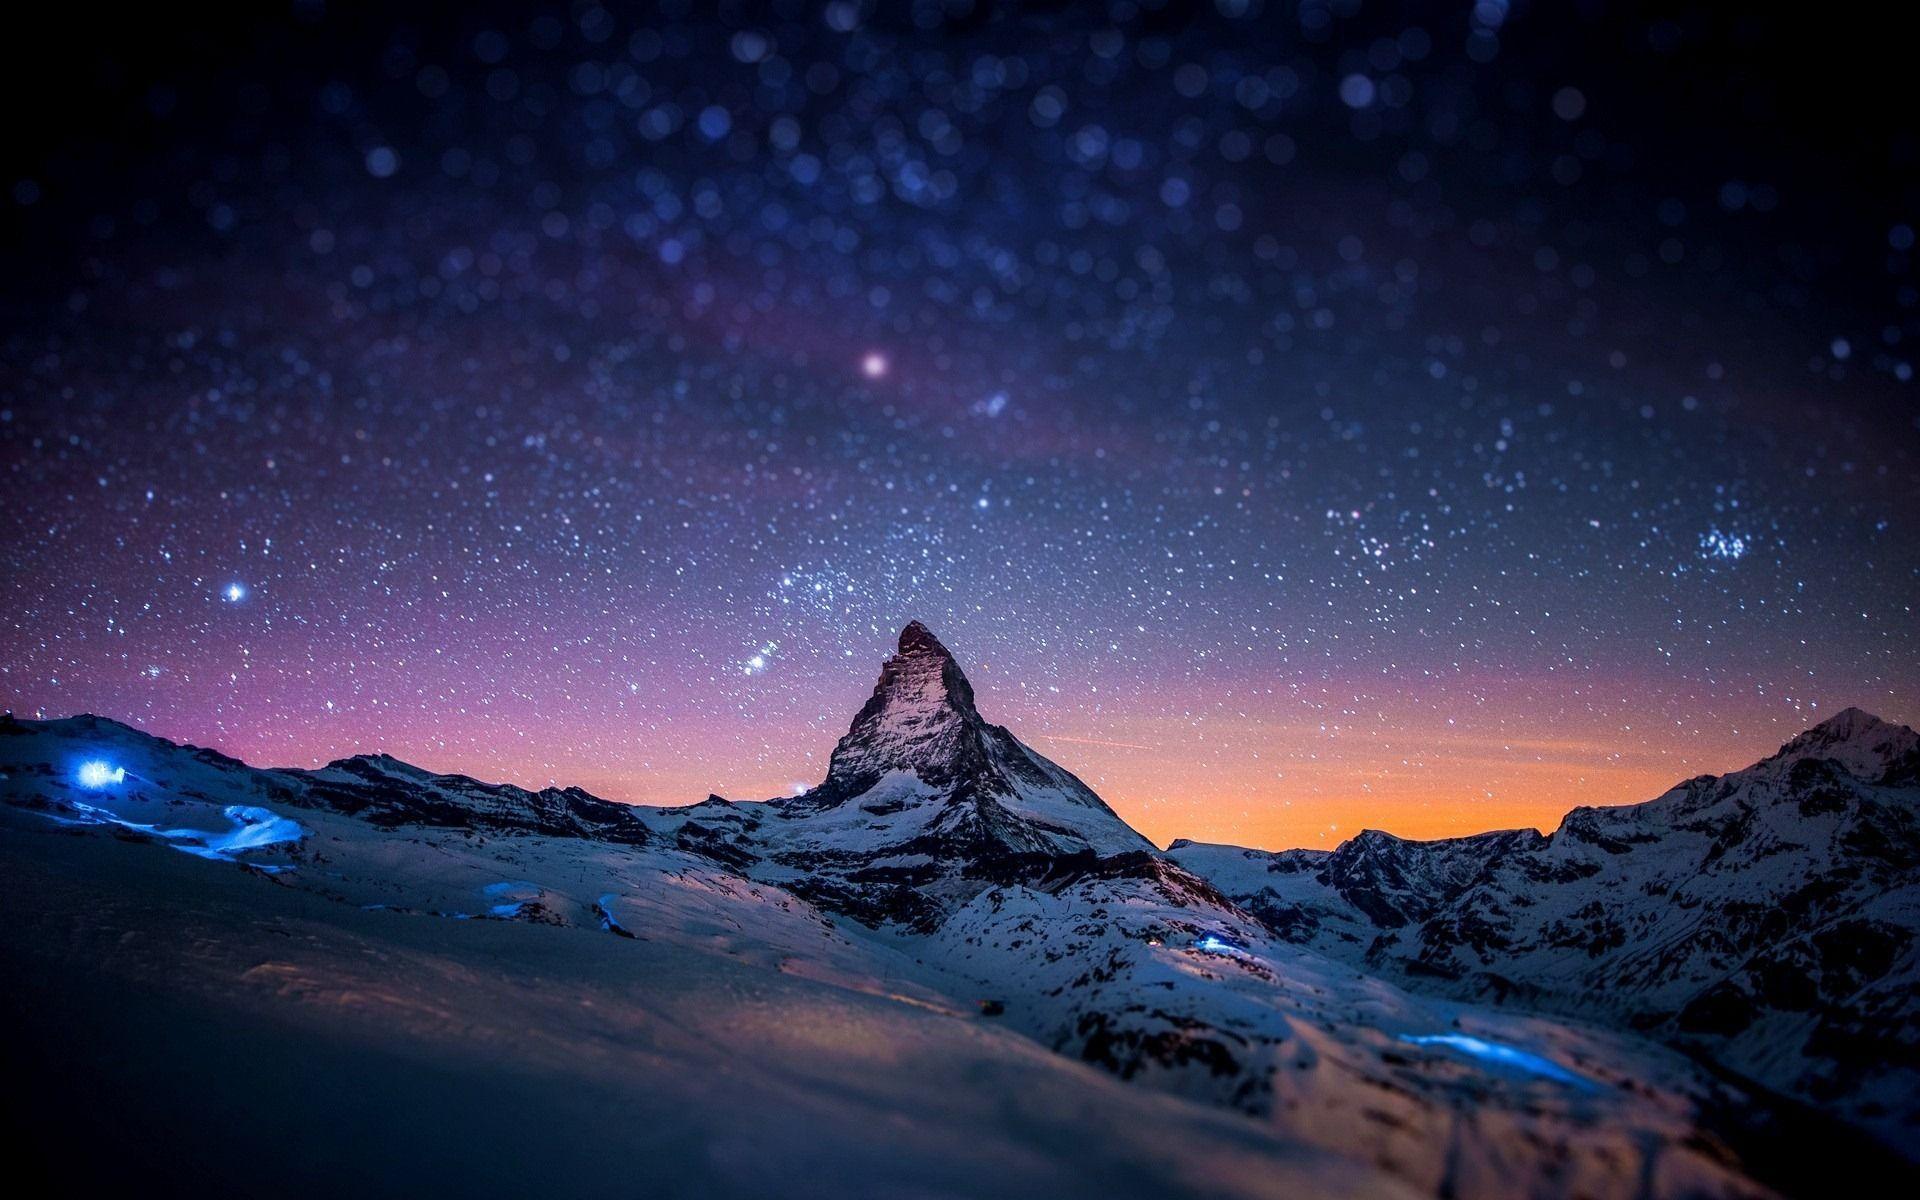 Wallpapers For > Night Sky Backgrounds